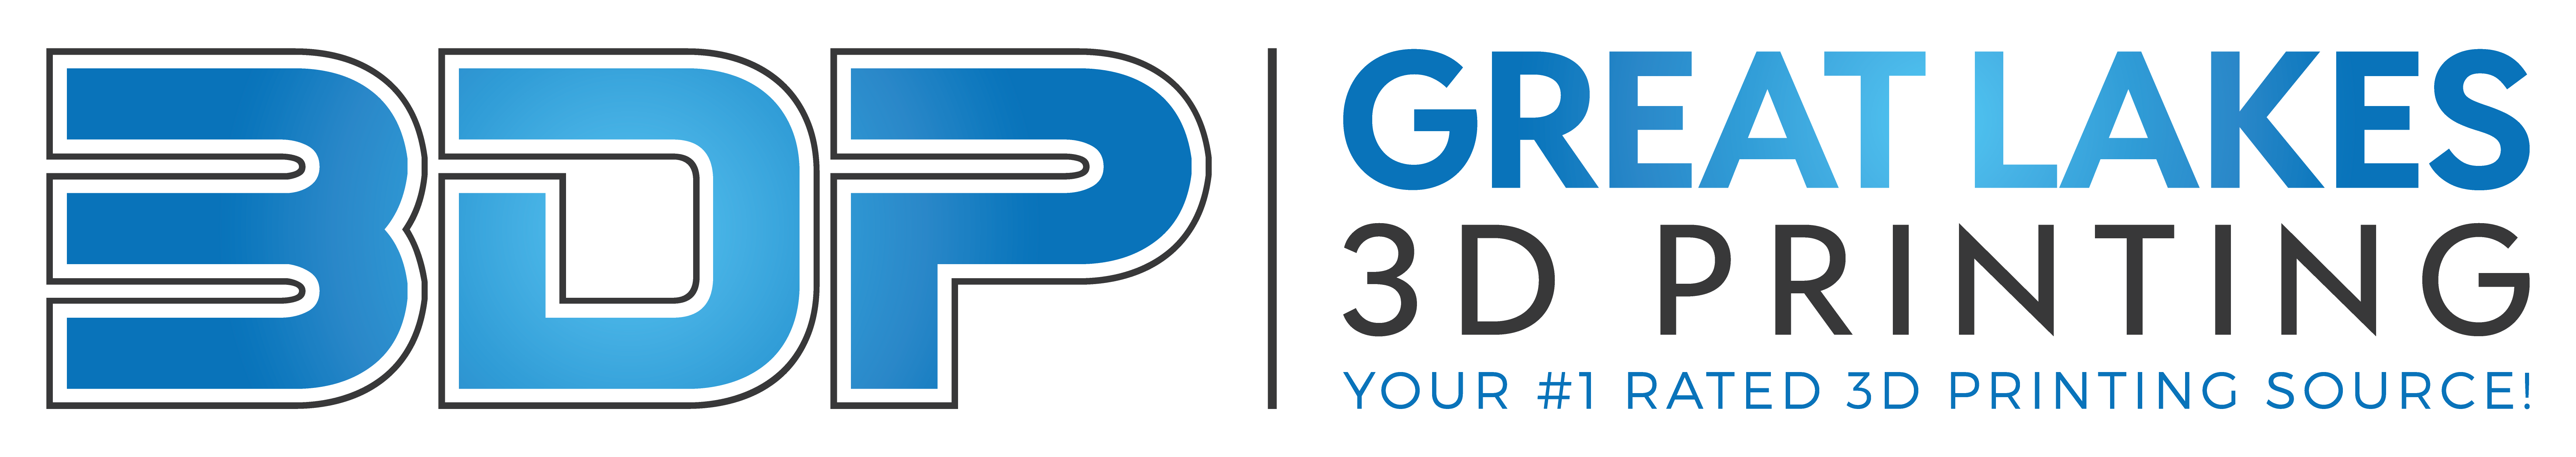 Great Lakes 3D Printing And Scanning LLC